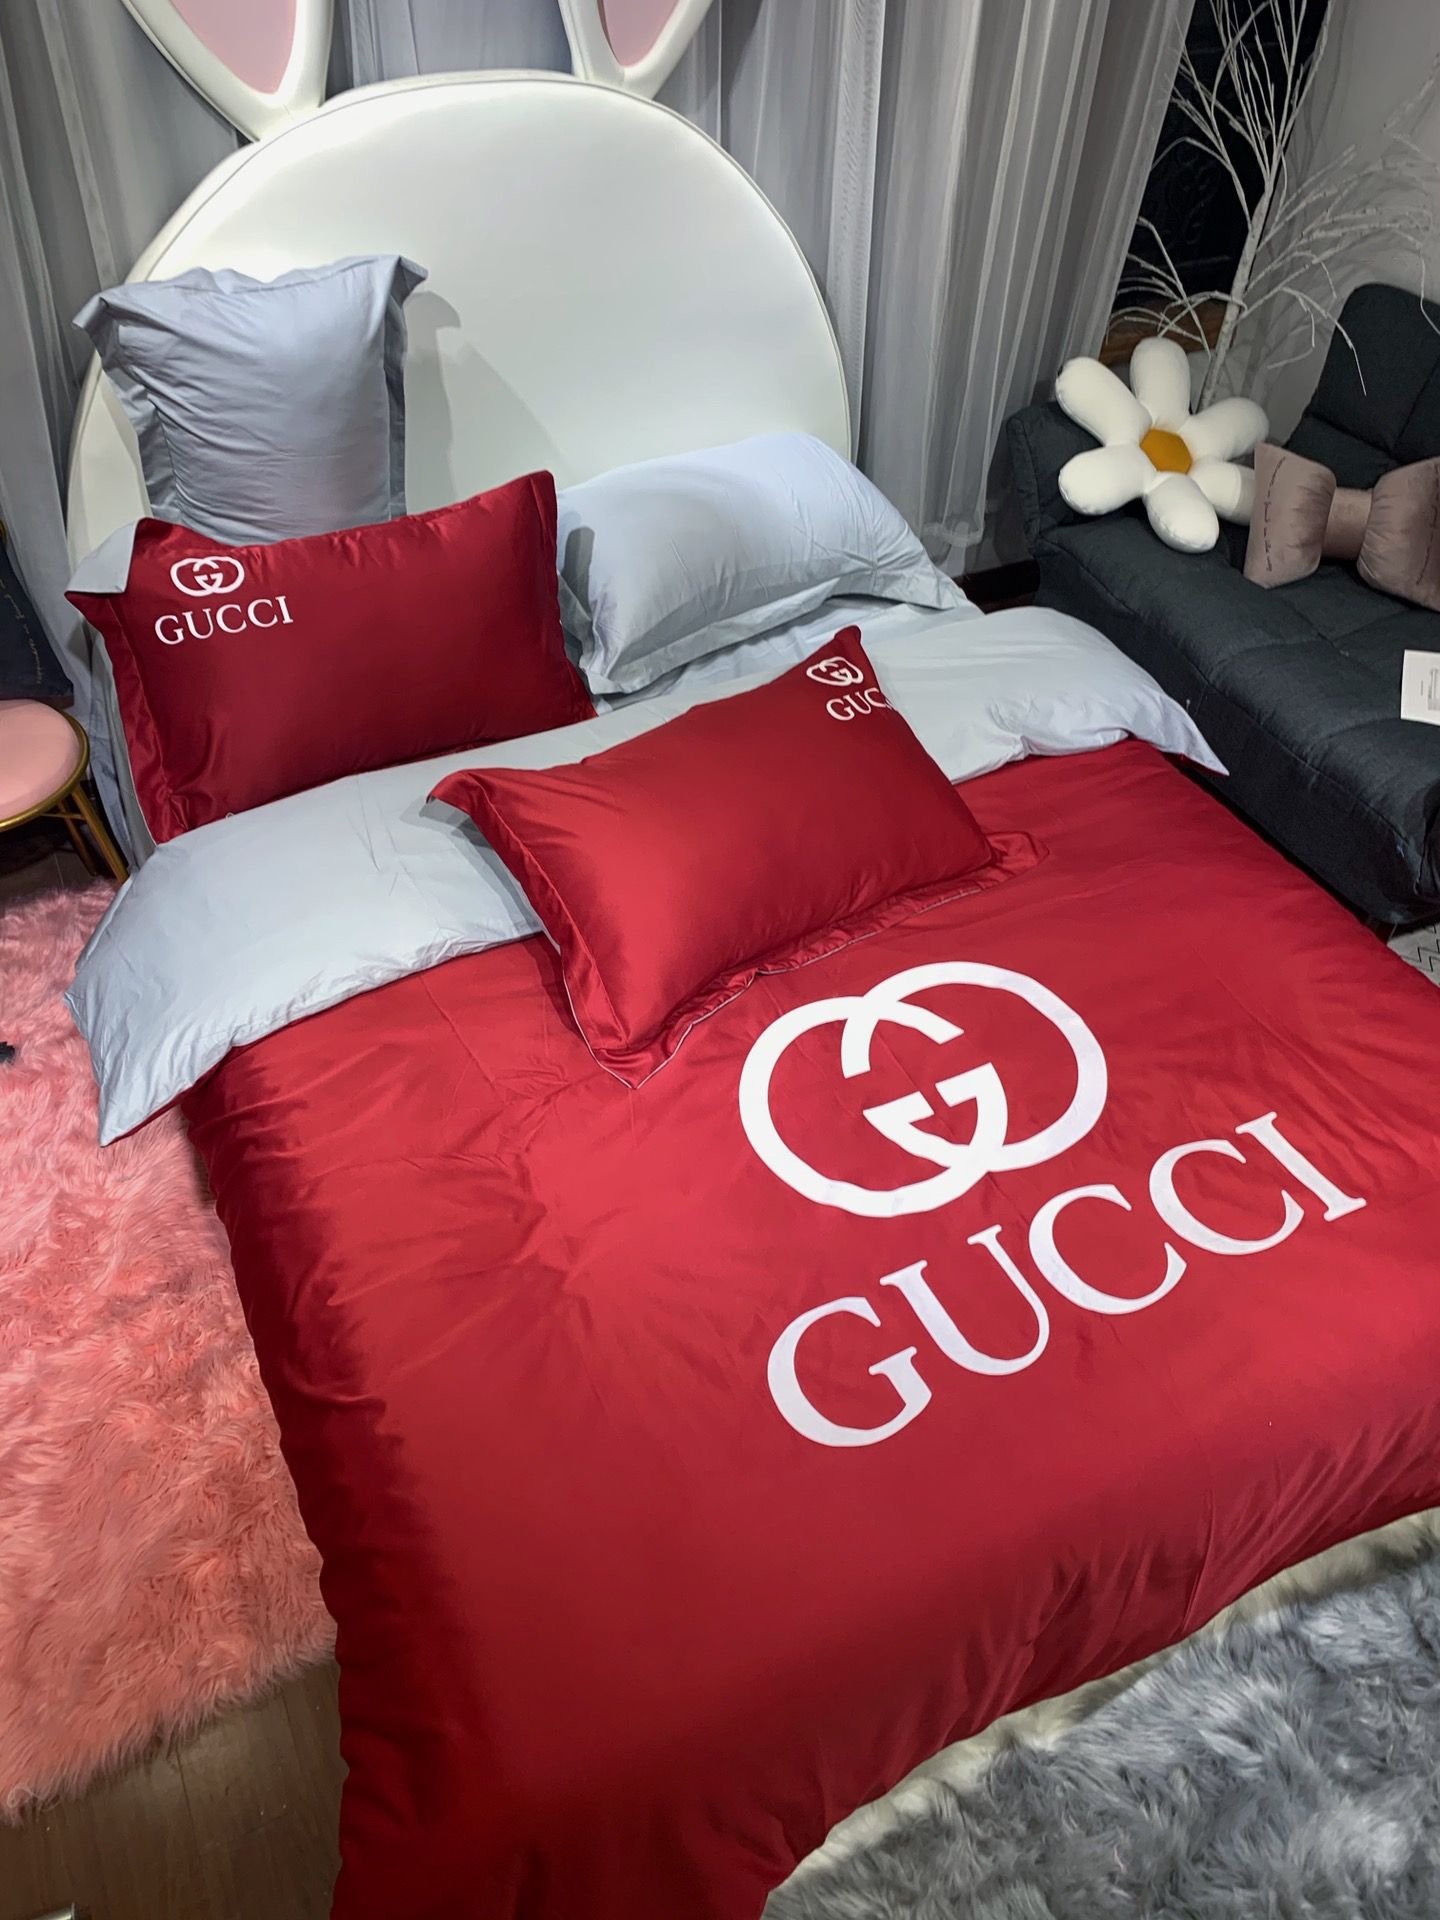 Luxury Gc Gucci Type 175 Bedding Sets Duvet Cover Luxury Brand Bedroom Sets